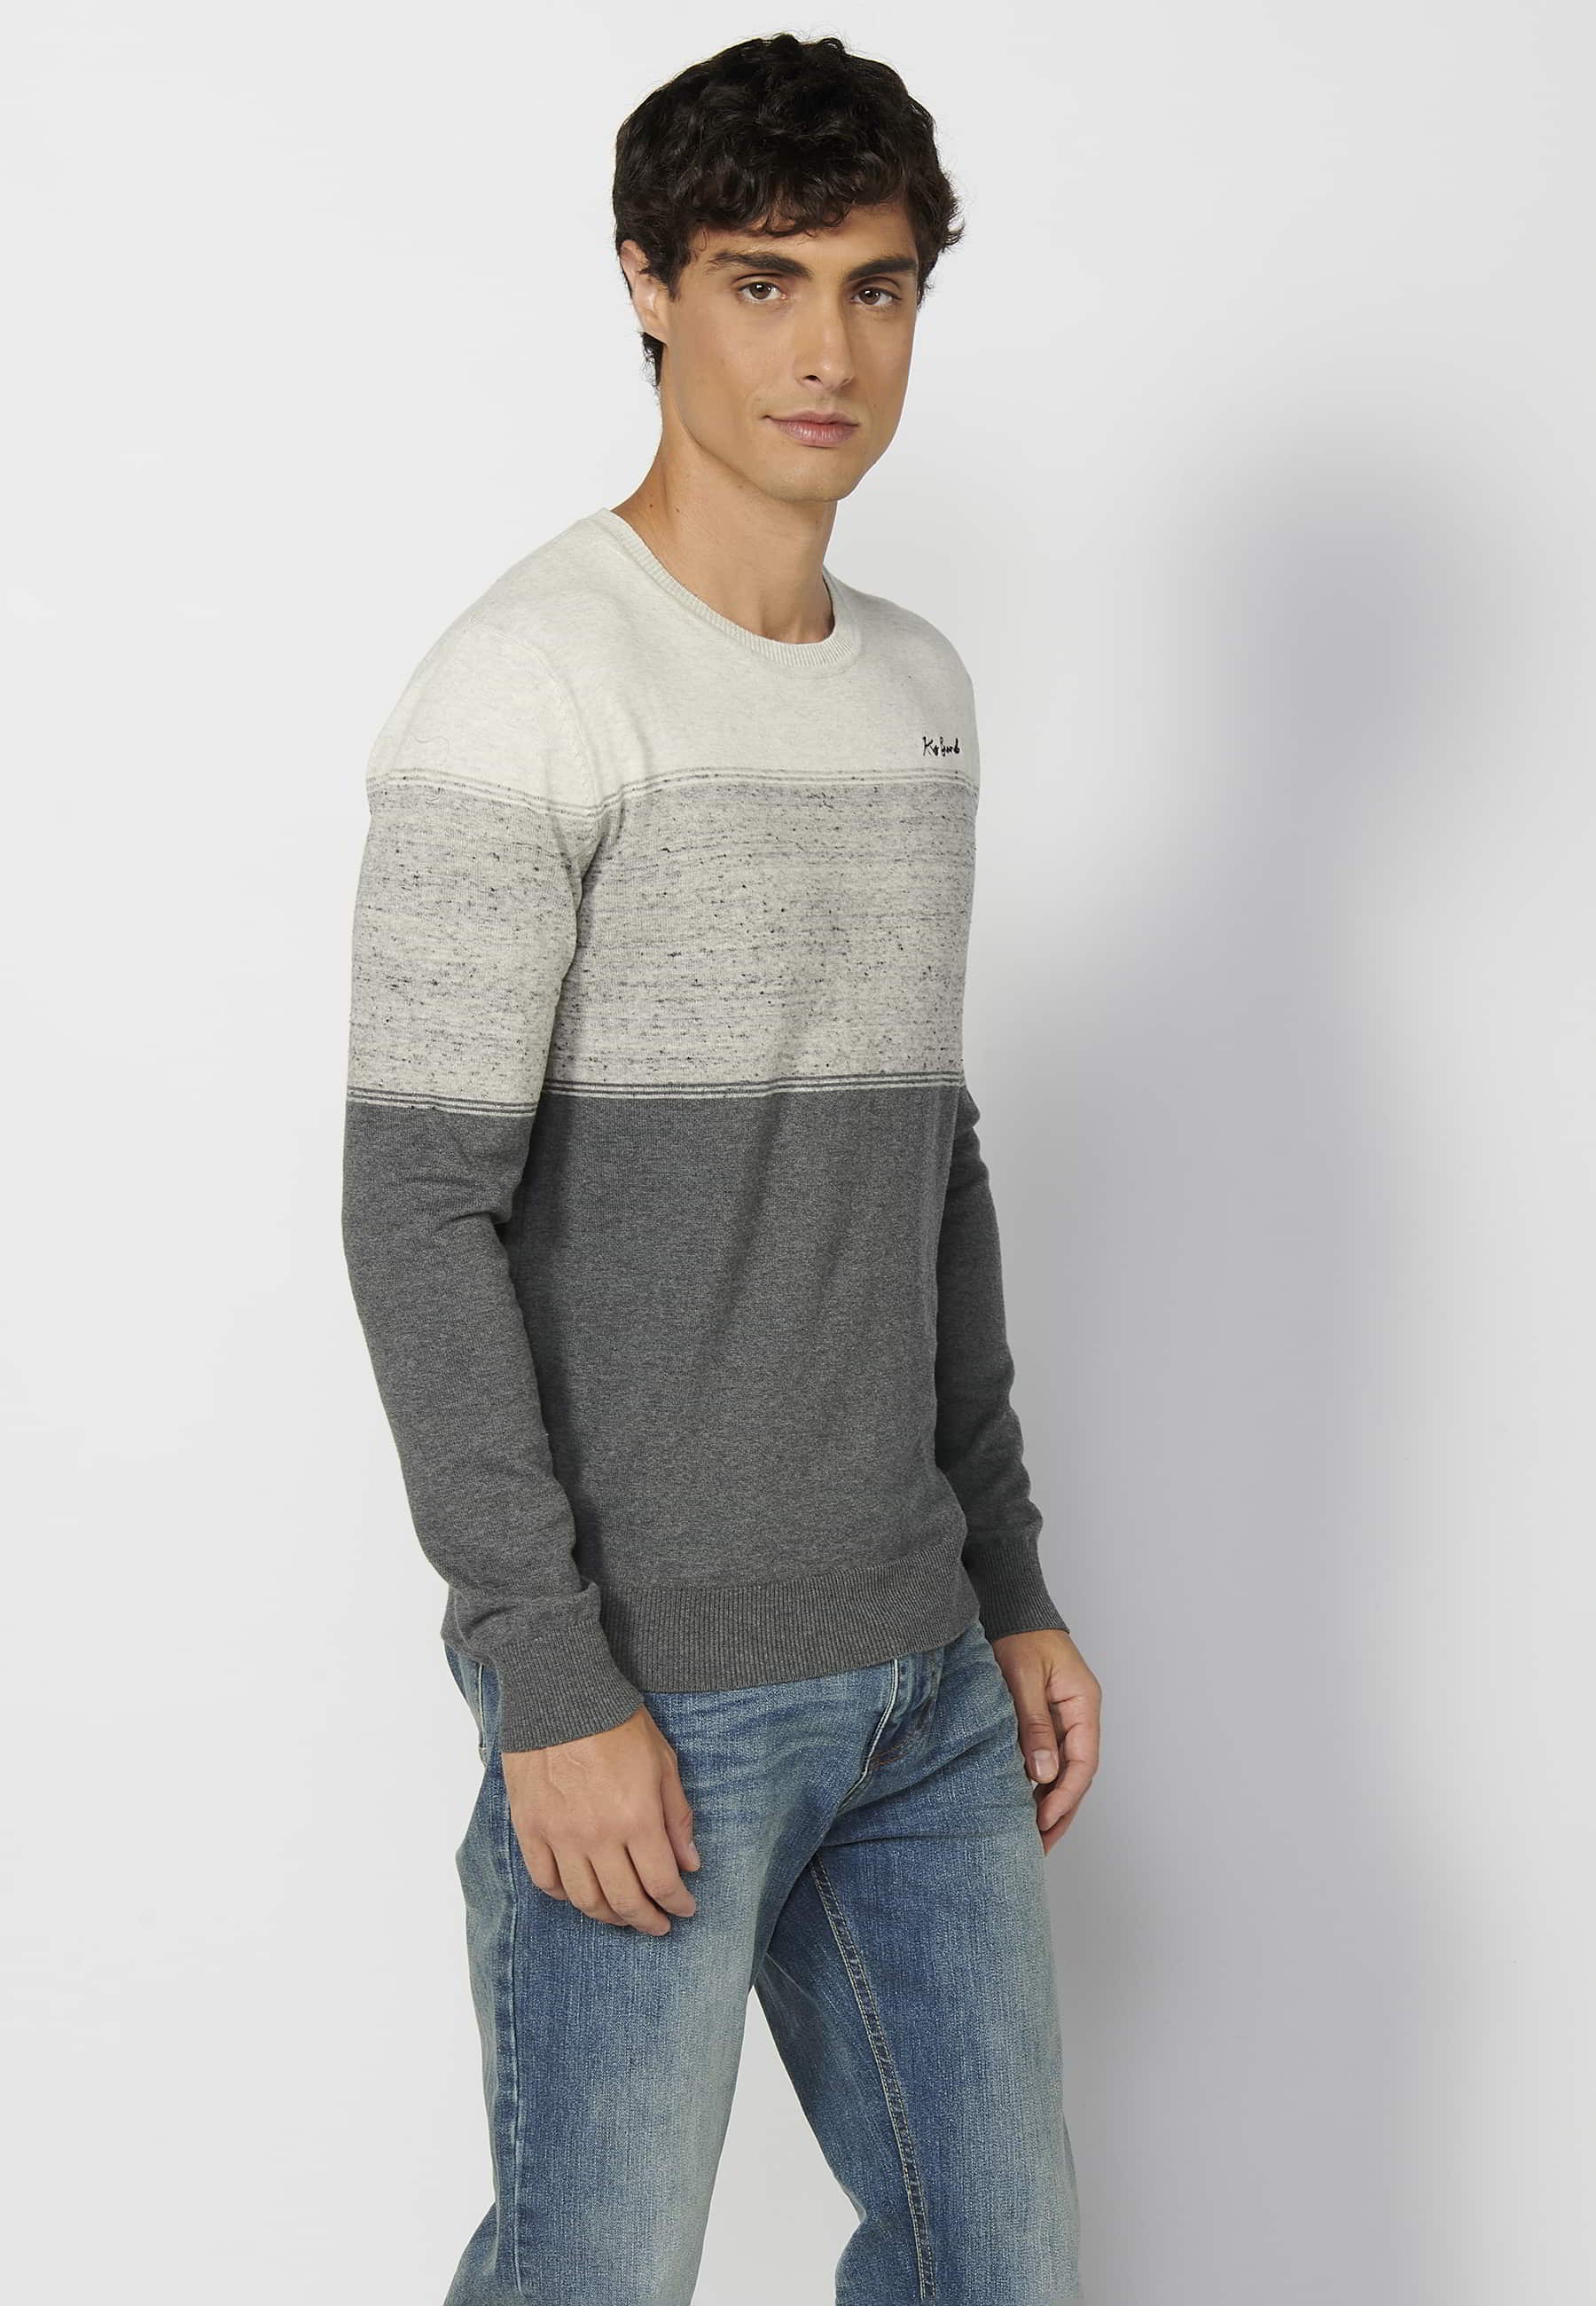 Men's Gray Round Neck Long Sleeve Cotton Knit Sweater 3